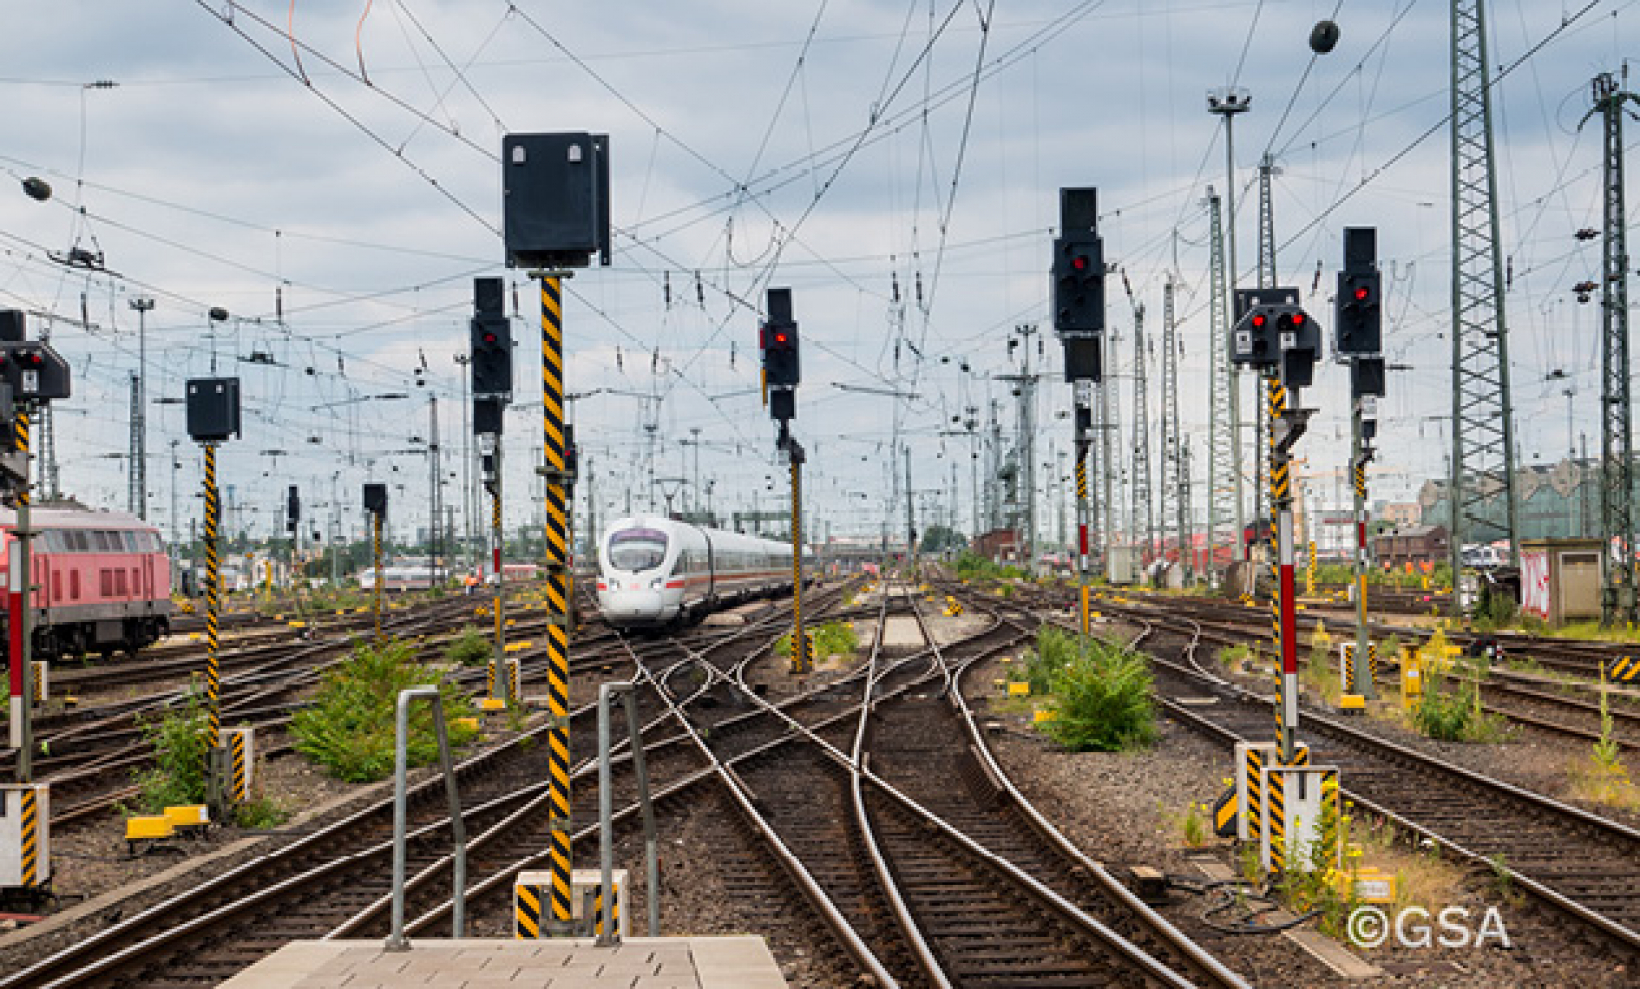 tamper-proof signalling systems